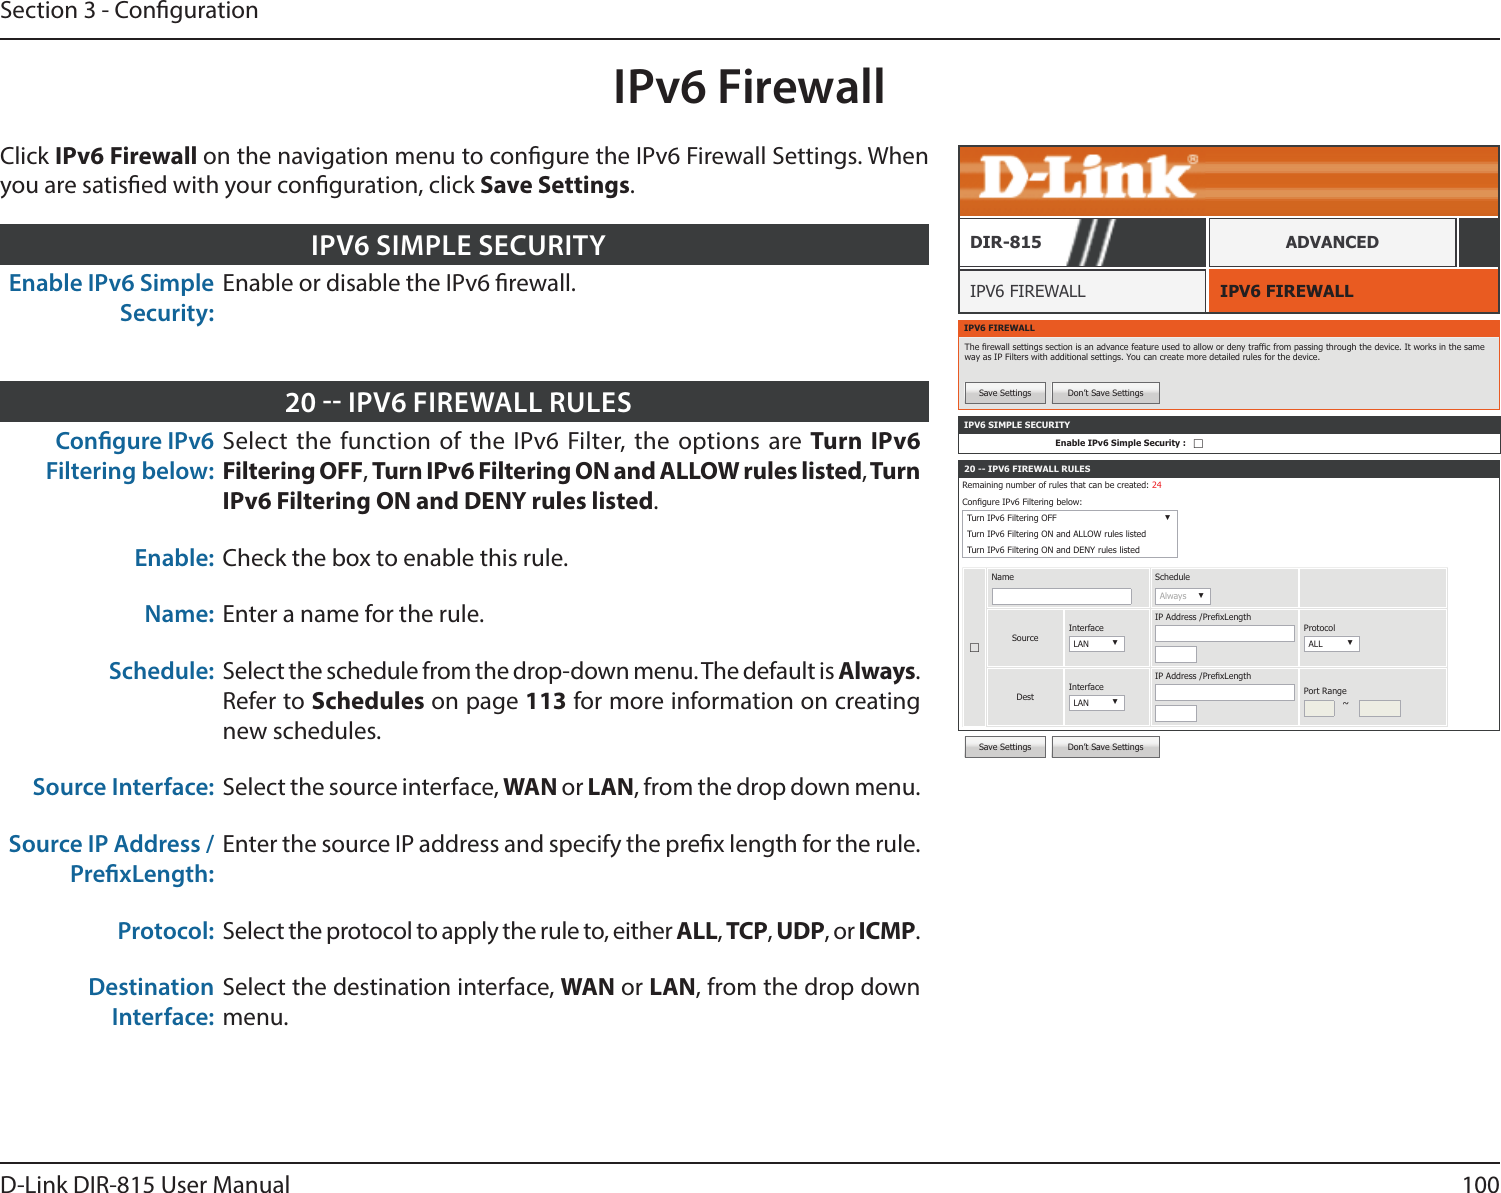 100D-Link DIR-815 User ManualSection 3 - CongurationSave Settings Don’t Save SettingsIPv6 FirewallIPV6 FIREWALLIPV6 FIREWALLDIR-815 ADVANCEDClick IPv6 Firewall on the navigation menu to congure the IPv6 Firewall Settings. When you are satised with your conguration, click Save Settings.Enable IPv6 Simple Security:Enable or disable the IPv6 rewall.IPV6 SIMPLE SECURITYCongure IPv6 Filtering below: Select the function of the IPv6 Filter, the options are Turn IPv6 Filtering OFF, Turn IPv6 Filtering ON and ALLOW rules listed, Turn IPv6 Filtering ON and DENY rules listed.Enable: Check the box to enable this rule.Name: Enter a name for the rule.Schedule: Select the schedule from the drop-down menu. The default is Always. Refer to Schedules on page 113 for more information on creating new schedules.Source Interface: Select the source interface, WAN or LAN, from the drop down menu.Source IP Address / PrexLength:Enter the source IP address and specify the prex length for the rule.Protocol: Select the protocol to apply the rule to, either ALL, TCP, UDP, or ICMP.Destination Interface:Select the destination interface, WAN or LAN, from the drop down menu.20  IPV6 FIREWALL RULESIPV6 FIREWALLThe rewall settings section is an advance feature used to allow or deny trafc from passing through the device. It works in the same way as IP Filters with additional settings. You can create more detailed rules for the device. Save Settings Don’t Save Settings20 -- IPV6 FIREWALL RULESRemaining number of rules that can be created: 24Congure IPv6 Filtering below: Turn IPv6 Filtering OFF ▼Turn IPv6 Filtering ON and ALLOW rules listedTurn IPv6 Filtering ON and DENY rules listed☐Name ScheduleAlways ▼SourceInterfaceLAN ▼IP Address /PrexLengthProtocolALL ▼DestInterfaceLAN ▼IP Address /PrexLengthPort Range~IPV6 SIMPLE SECURITYEnable IPv6 Simple Security : ☐